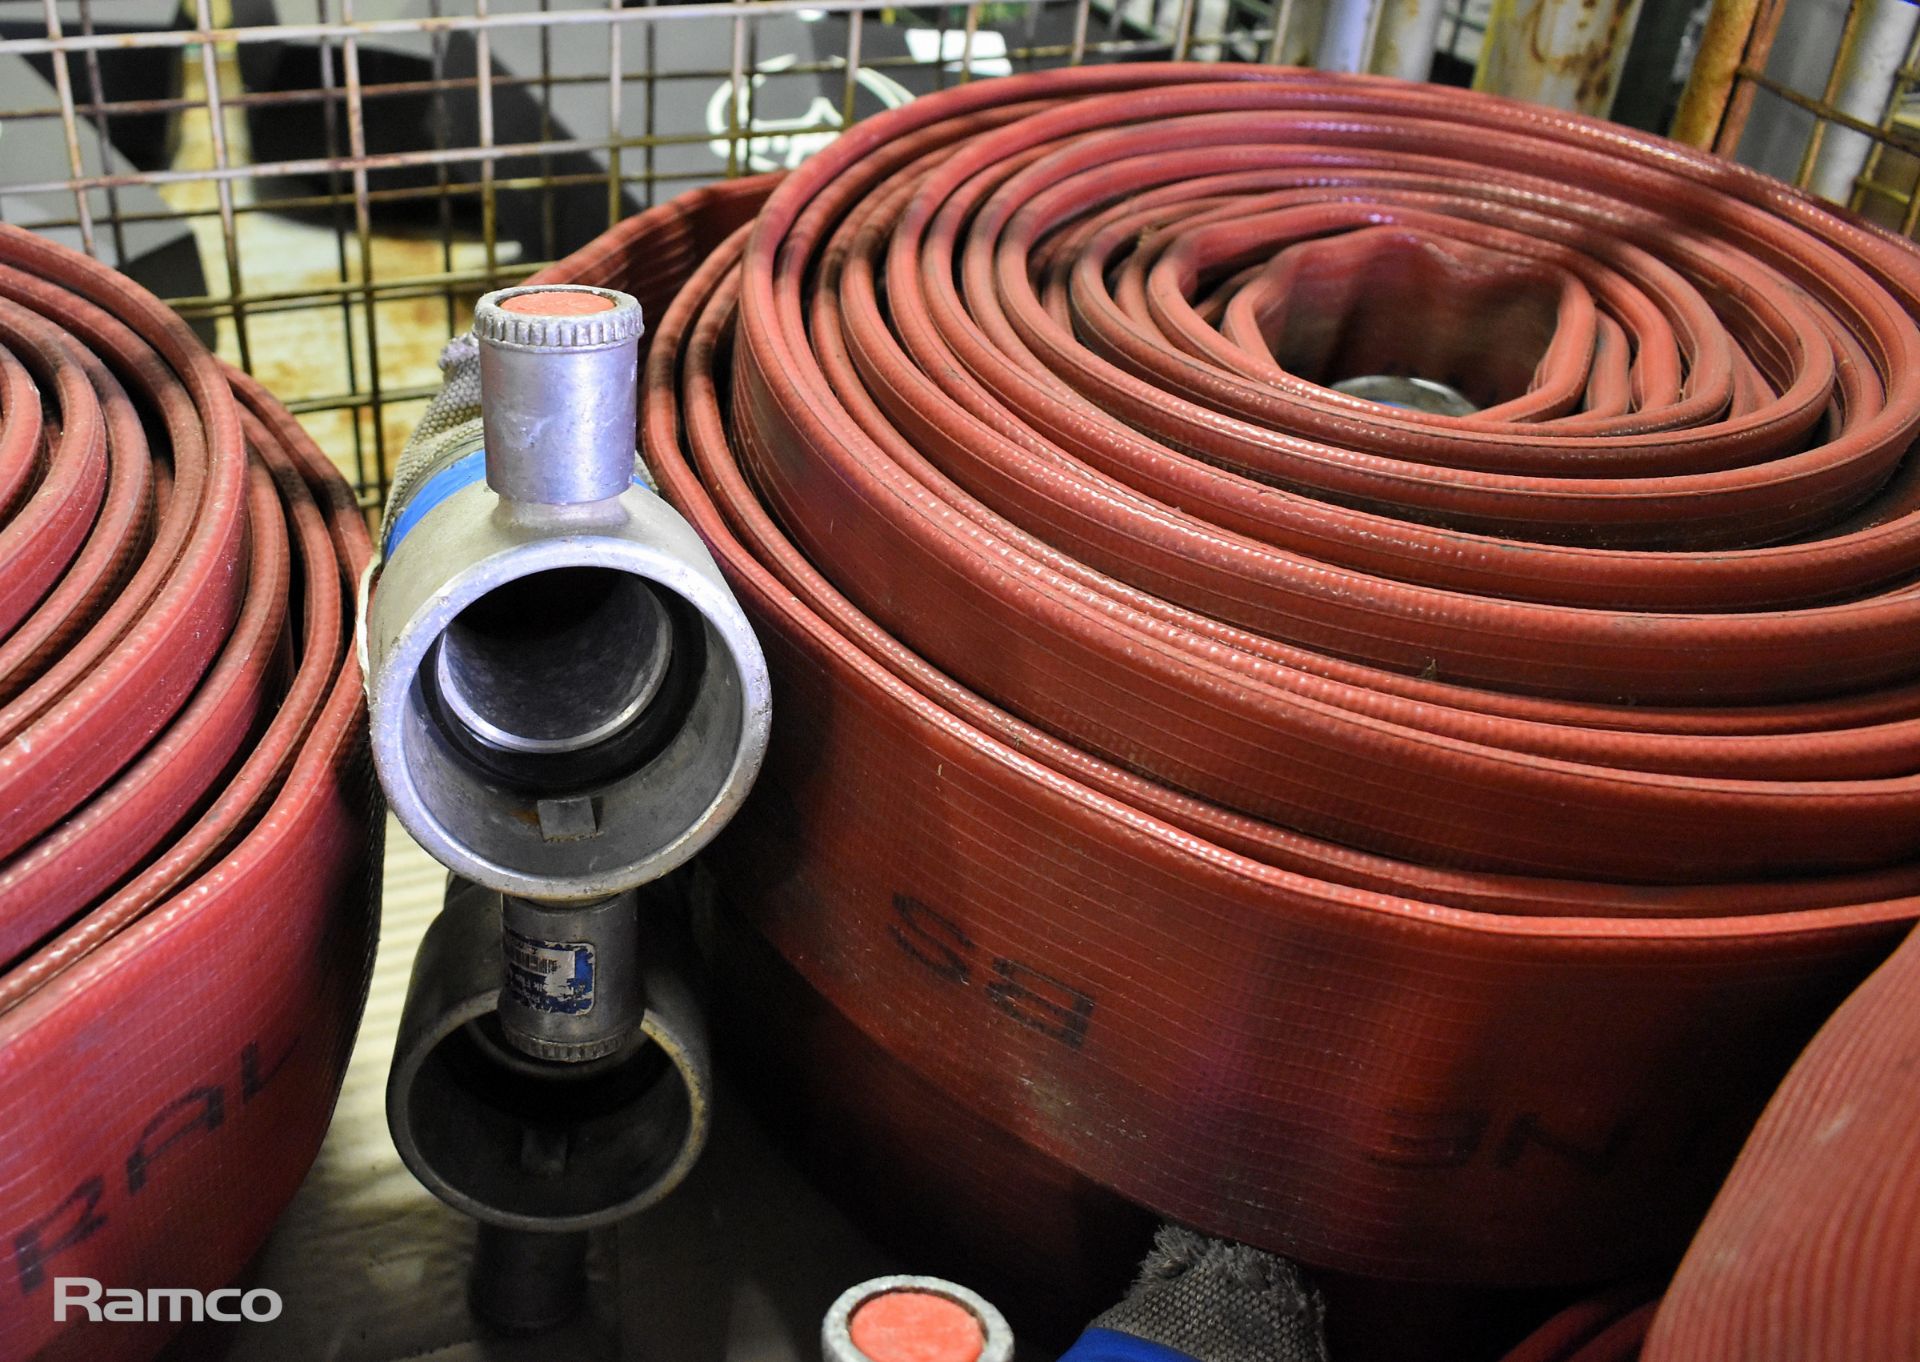 8x Angus Duraline 70mm lay flat hoses with couplings - approx 23m in length - Image 4 of 4